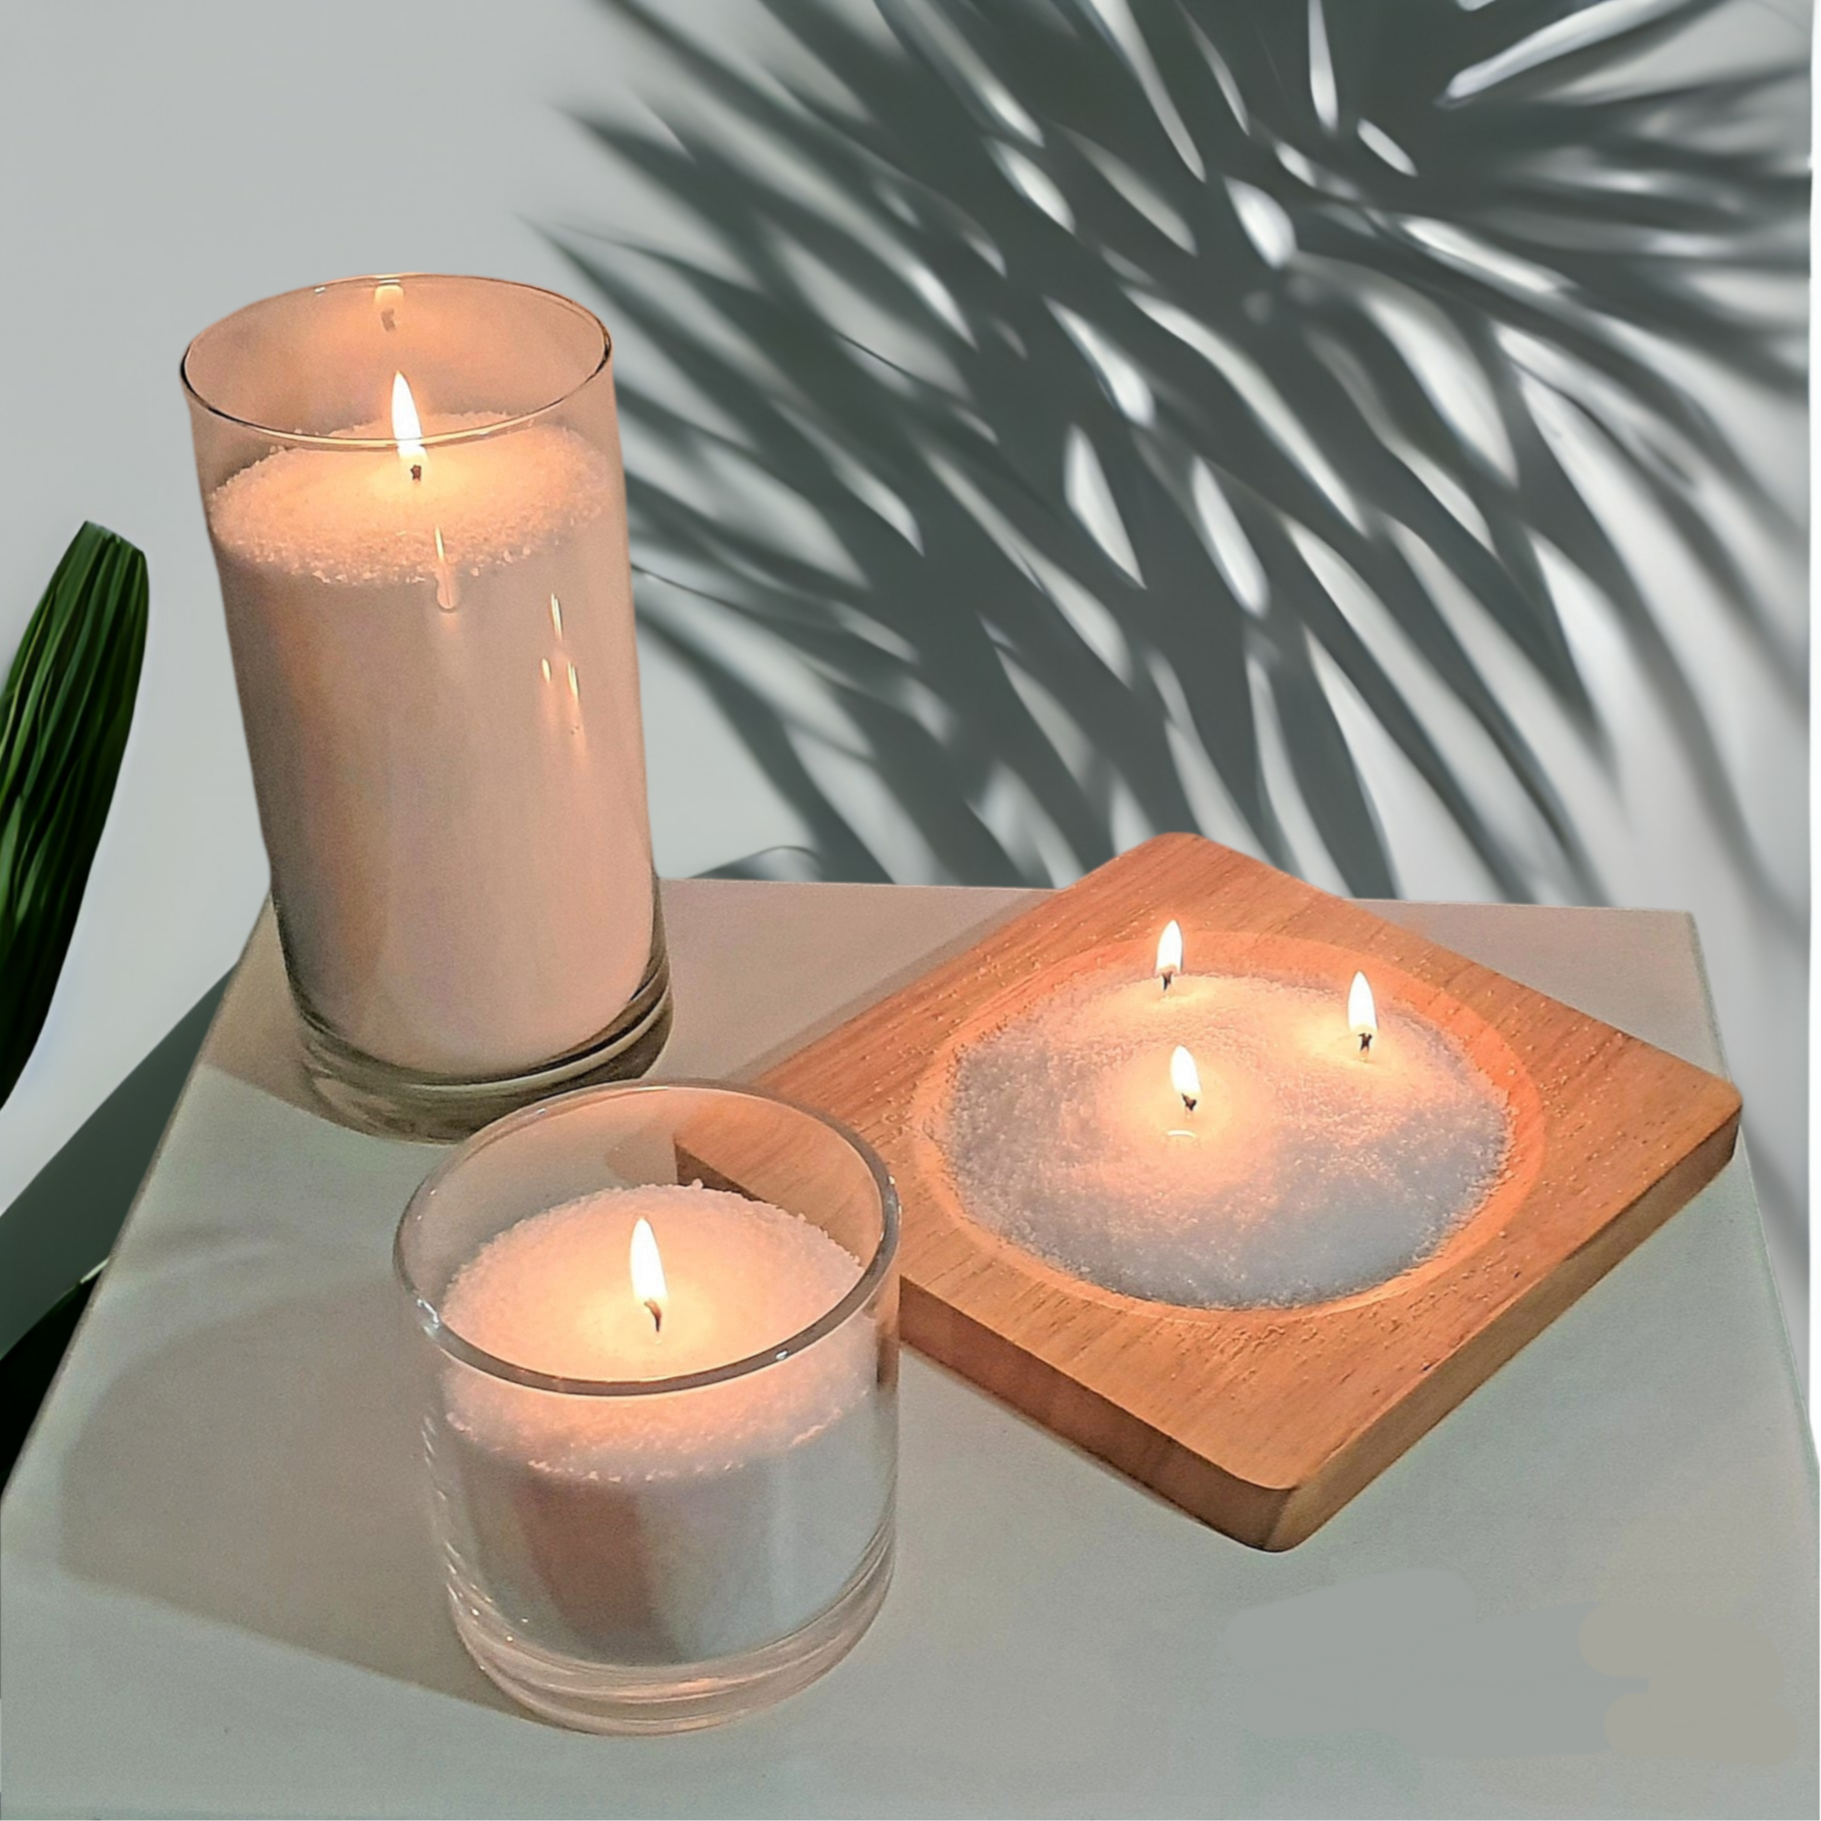 Pott Candles, The Candle Refill Company